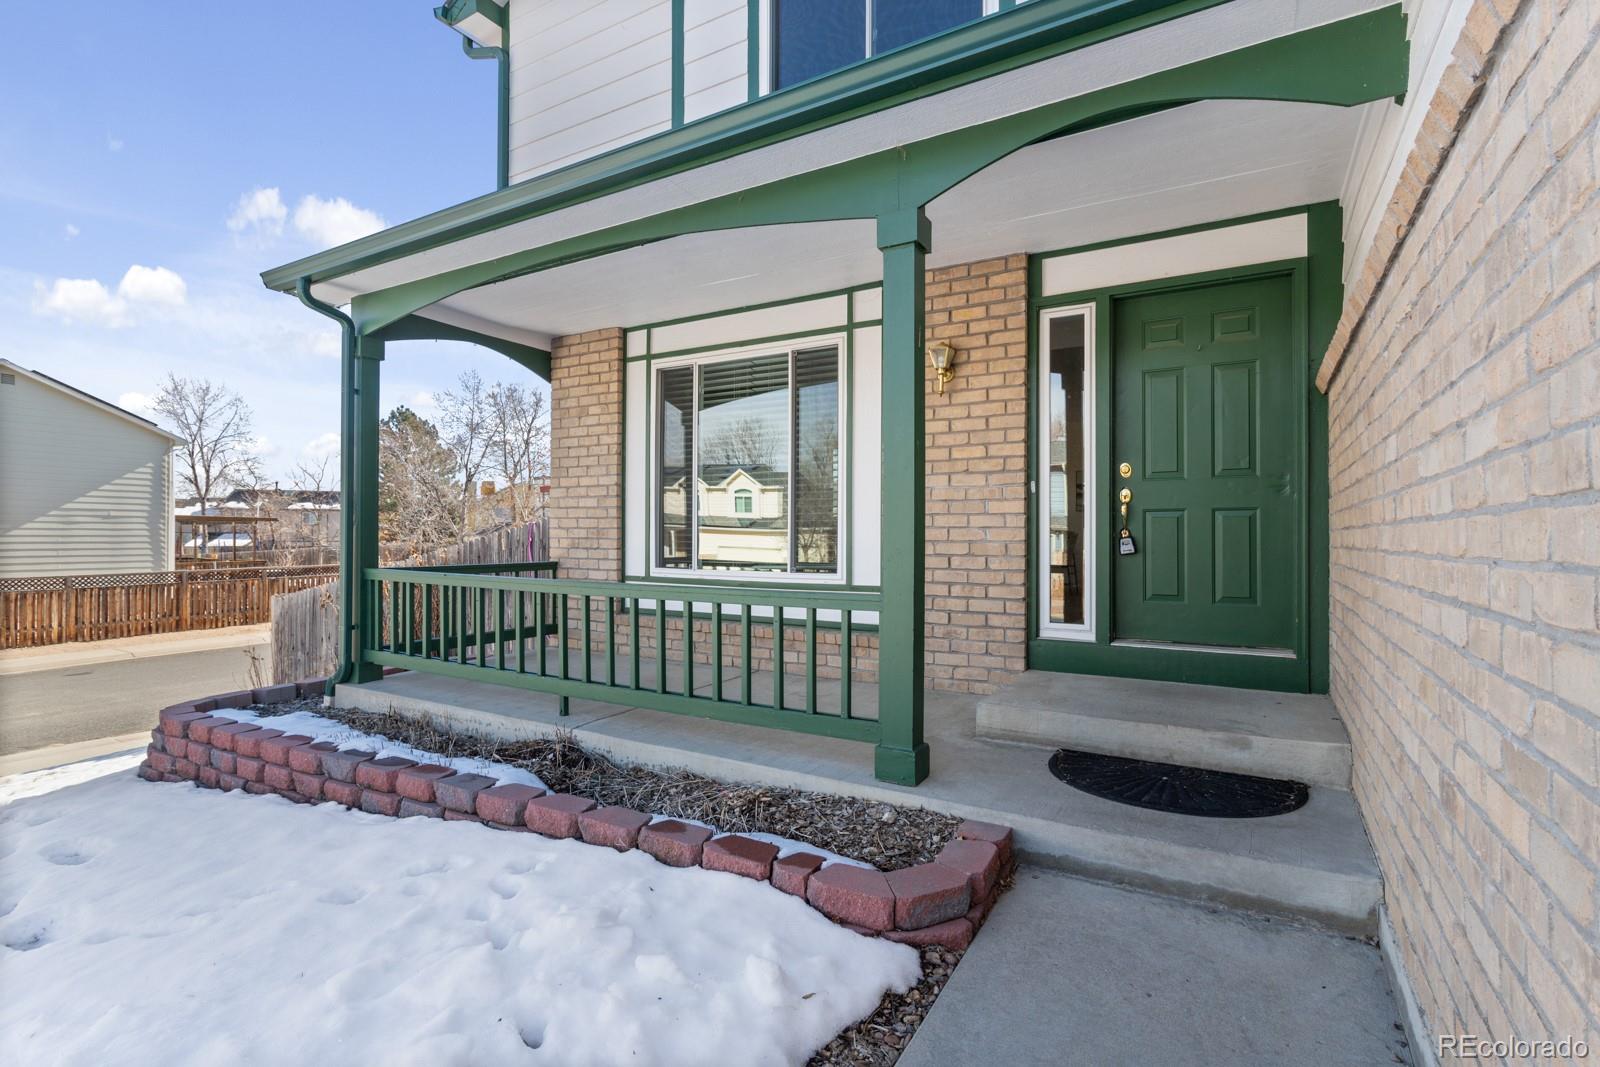 Report Image for 5686 W 109th Circle,Westminster, Colorado